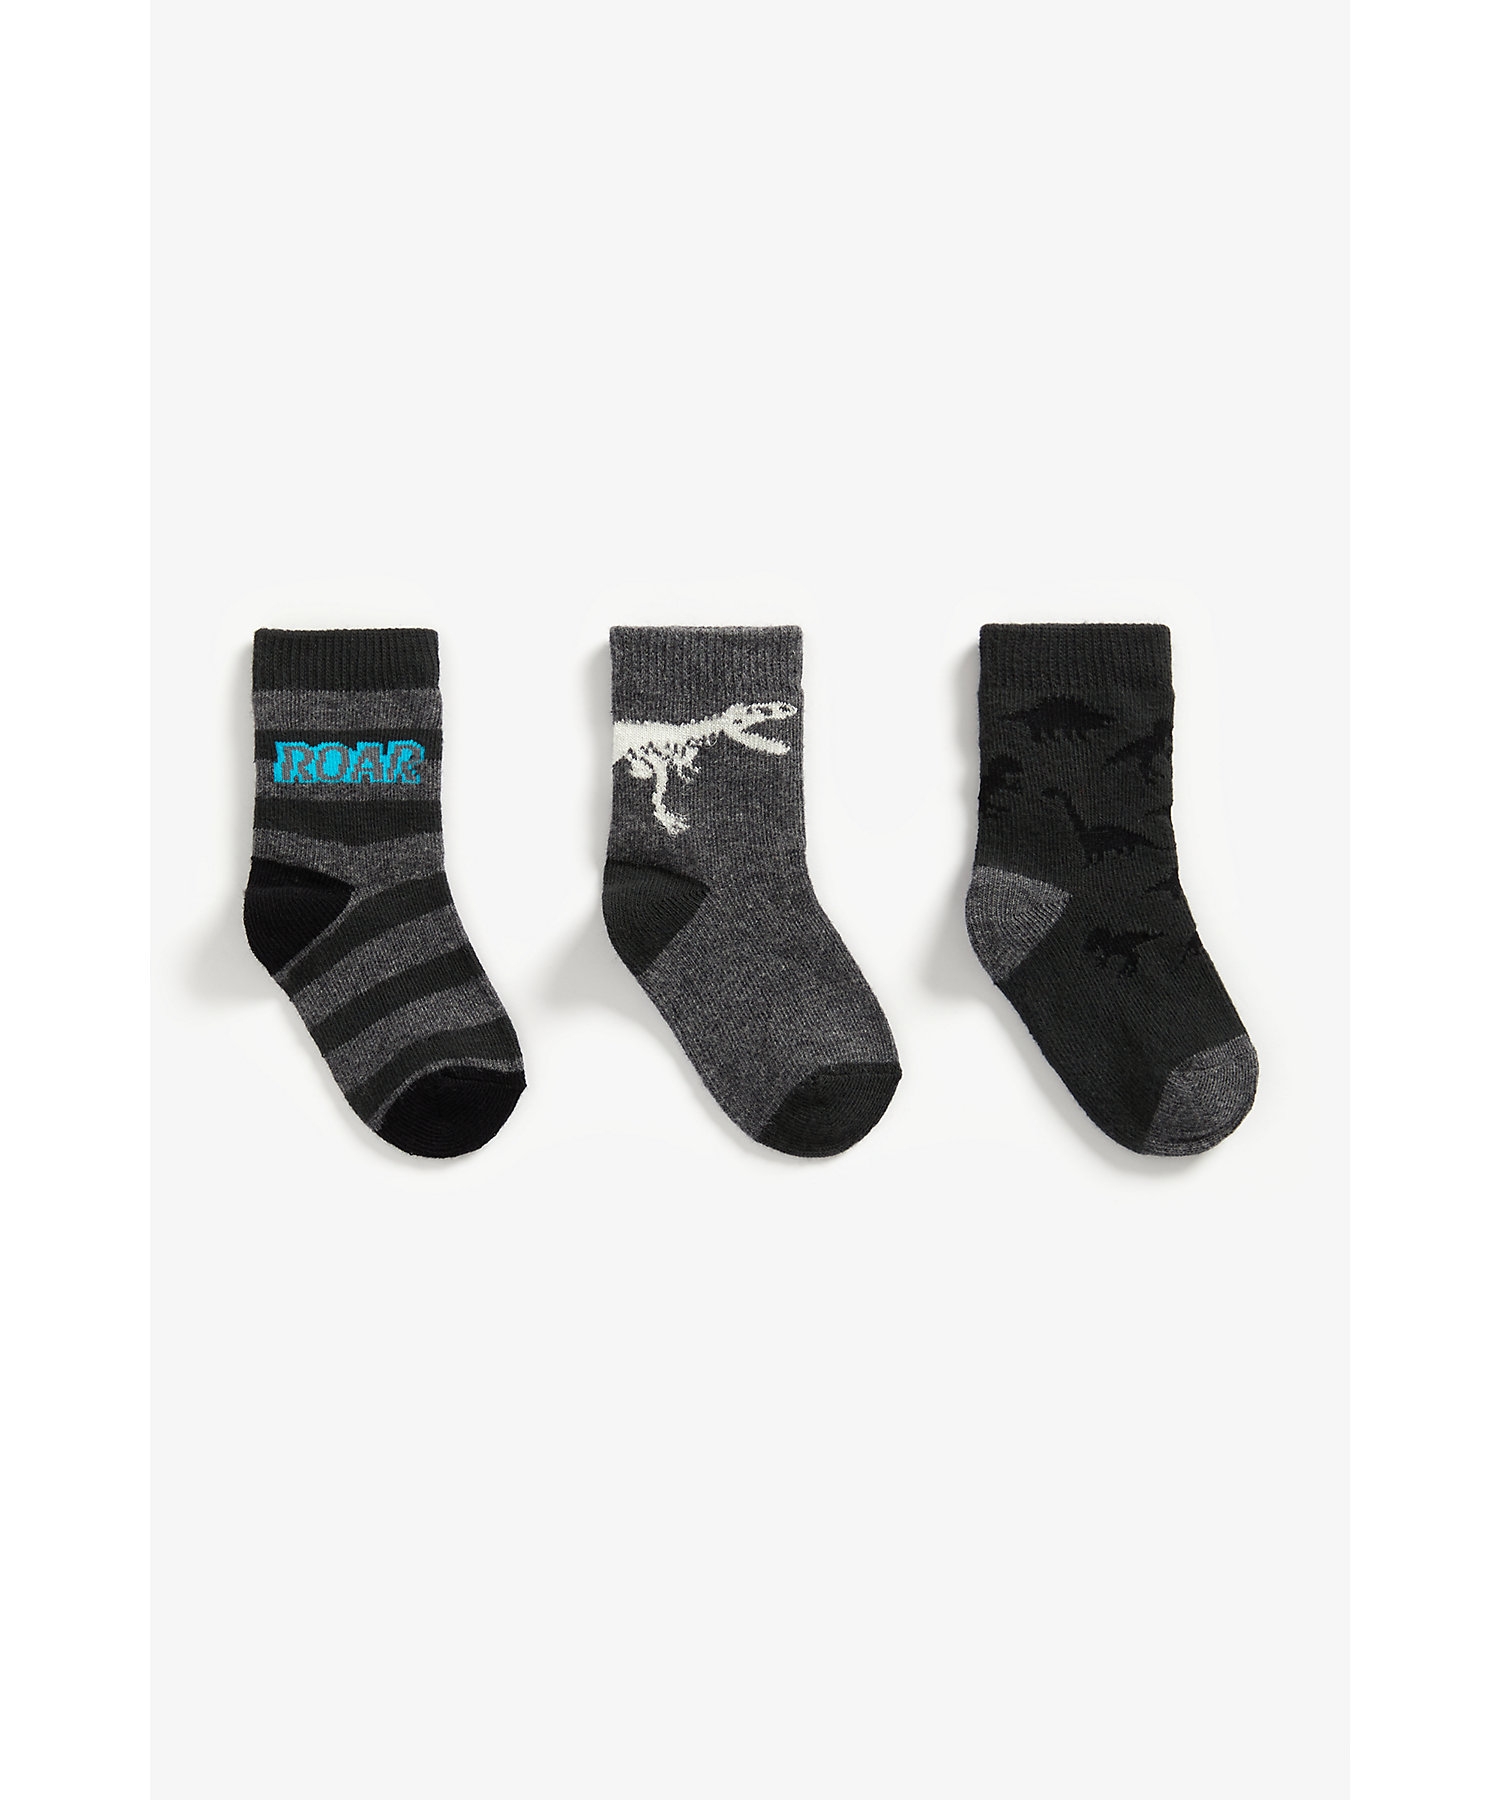 Boys Socks Striped And Dino Design - Pack Of 3 - Grey